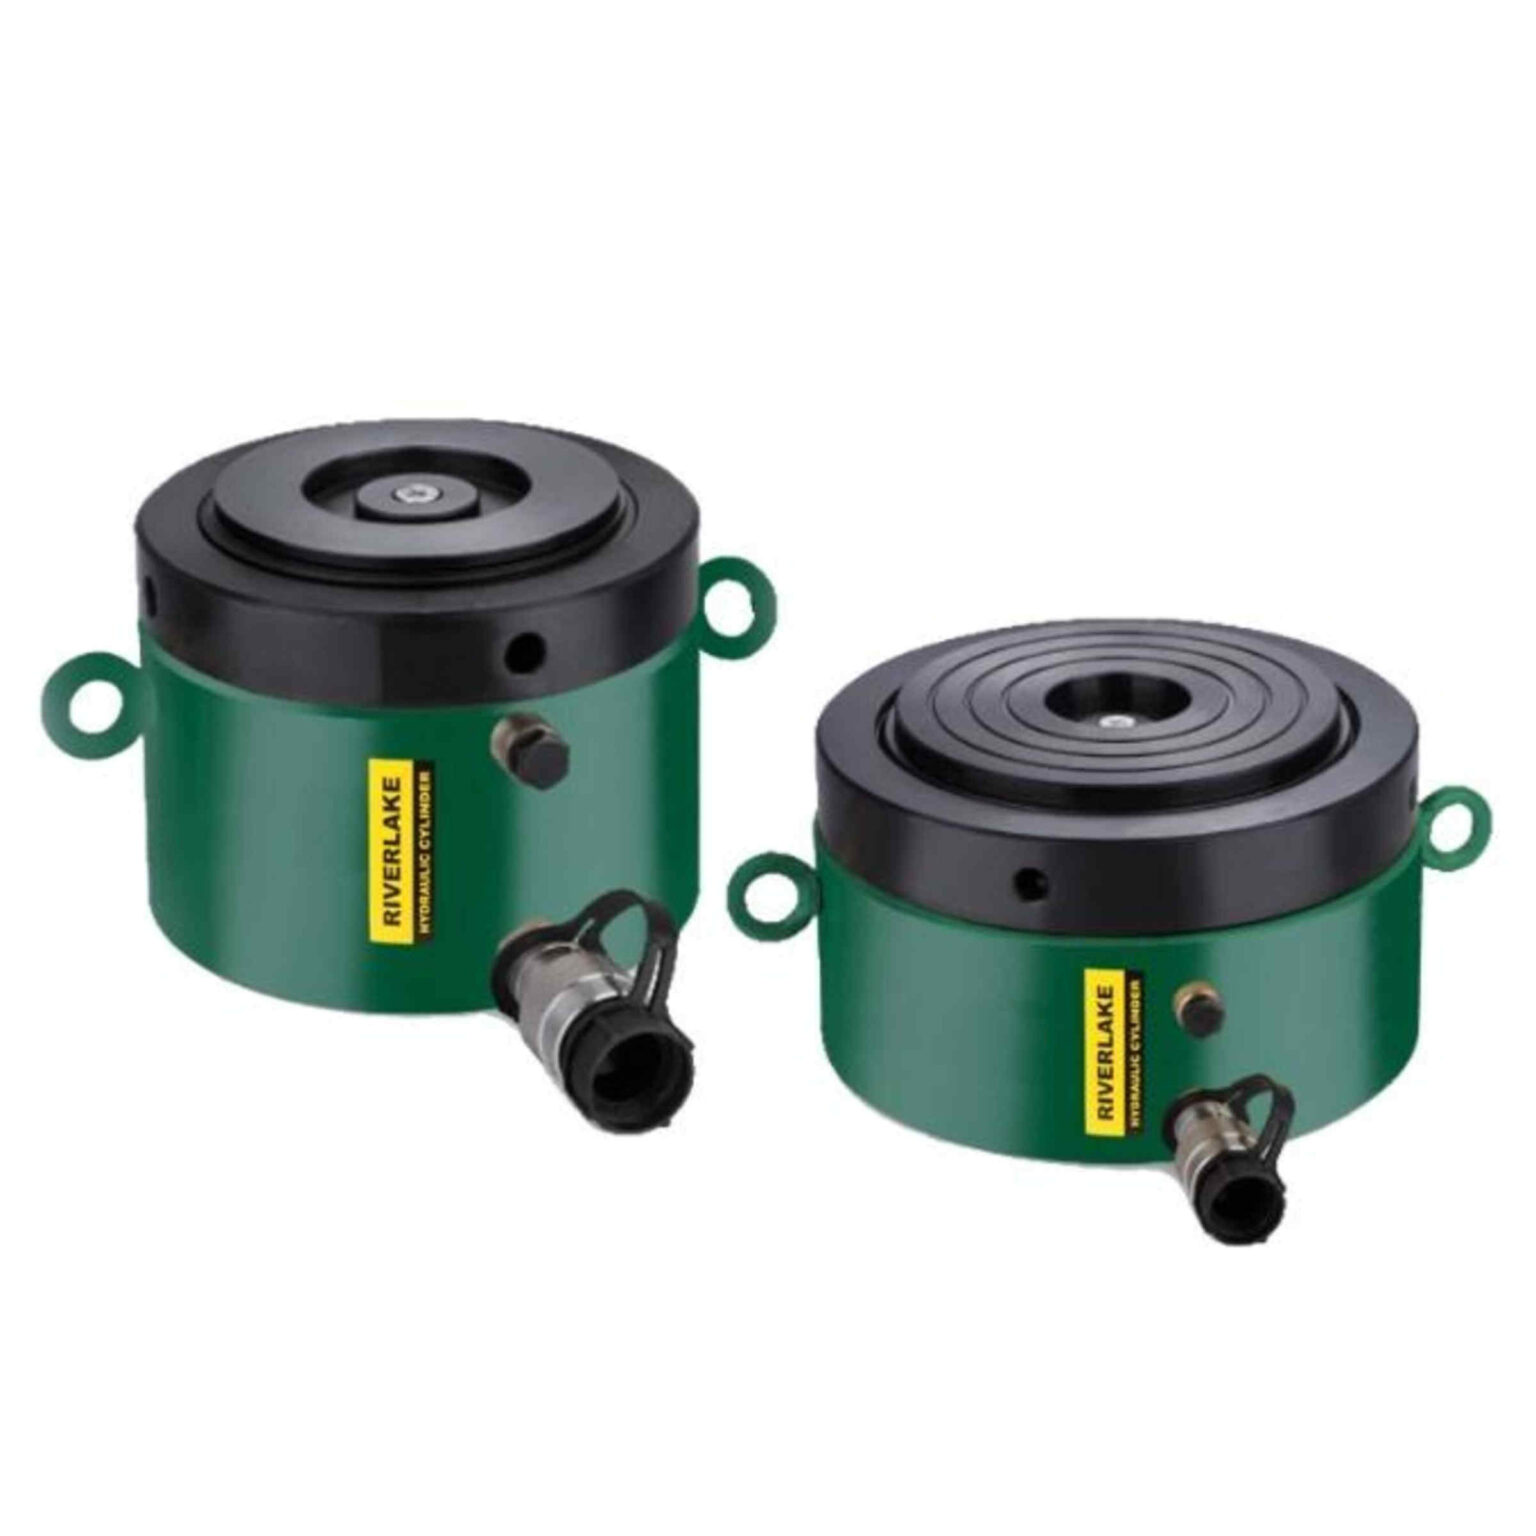 From hydraulic lifting cylinders to mechanical innovation, grab your toolbox and learn more about lock nut hydraulic cylinders!